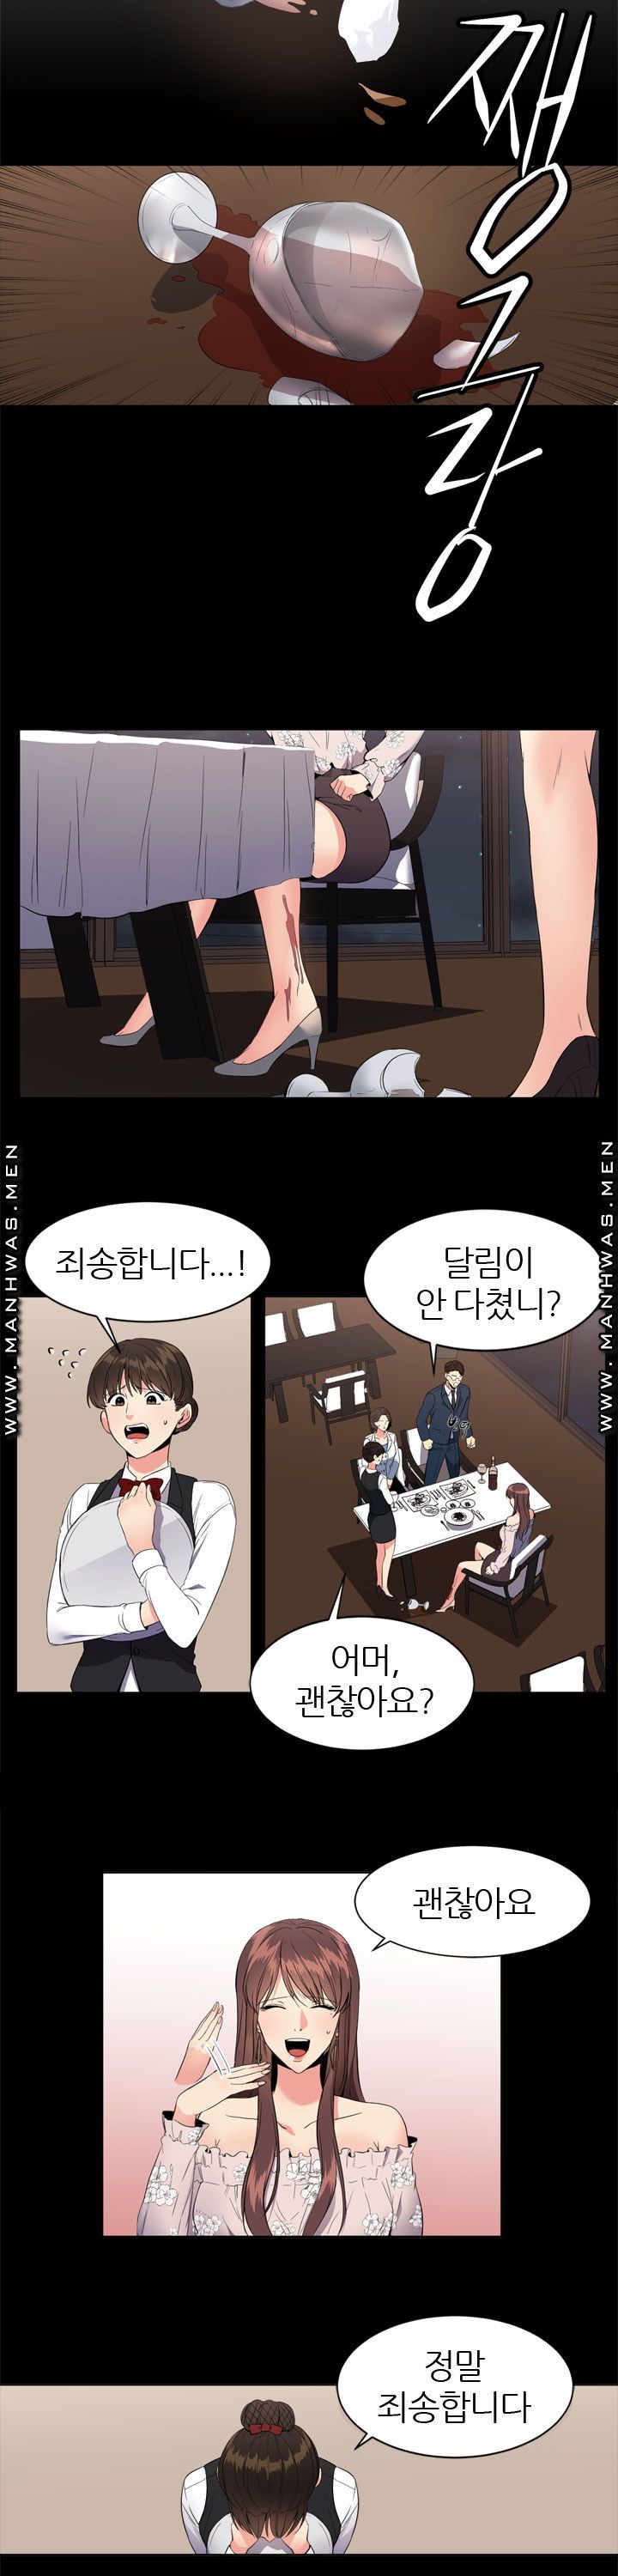 Memory of July Raw - Chapter 6 Page 2